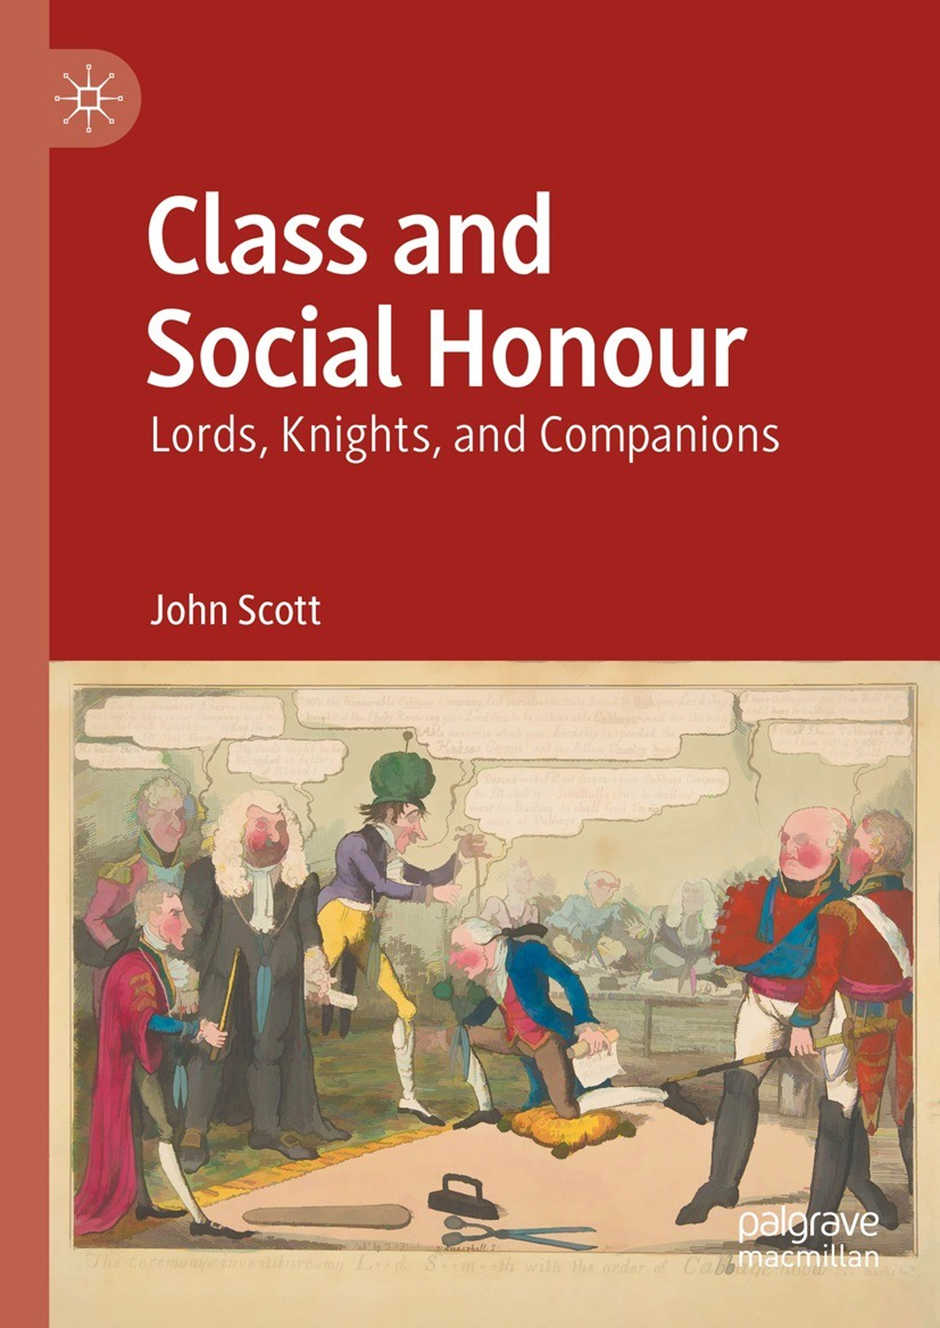 Class and Social Honour. Lords, Knights, and Companions